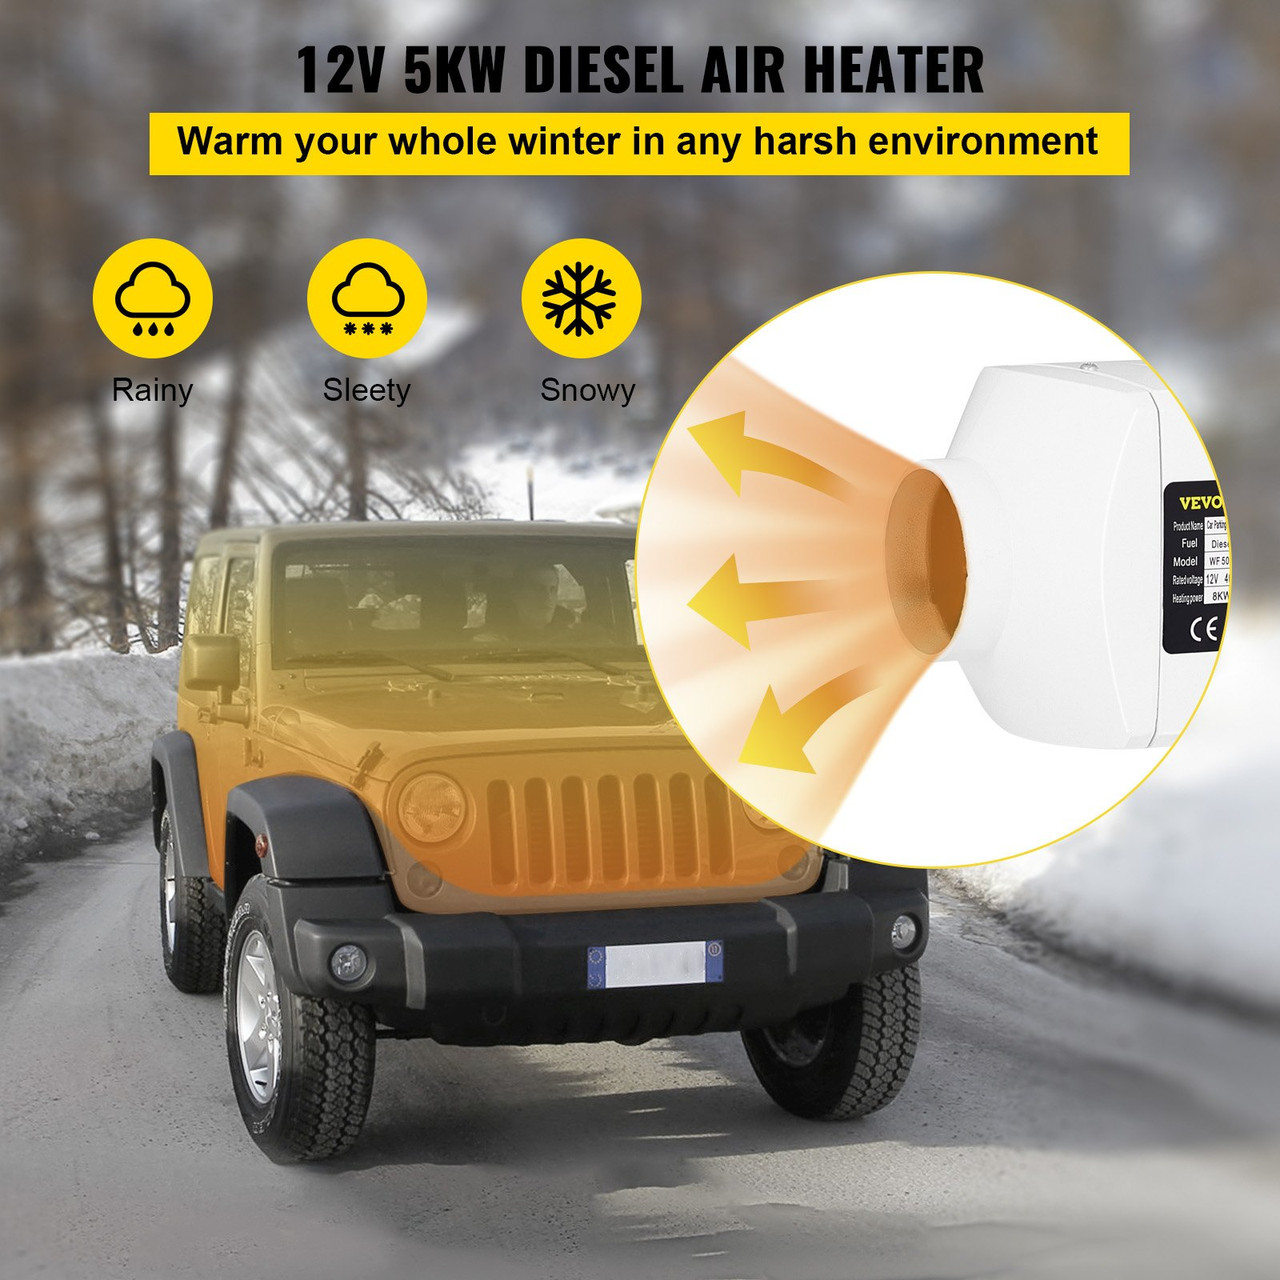 8KW Diesel Air Heater, 10L Tank, Diesel Heater 12V, Muffler, Diesel Parking Heater with LCD Switch and Remote Control, Fast Heating for Truck, Boat, Car Trailer, Campervans and Caravans